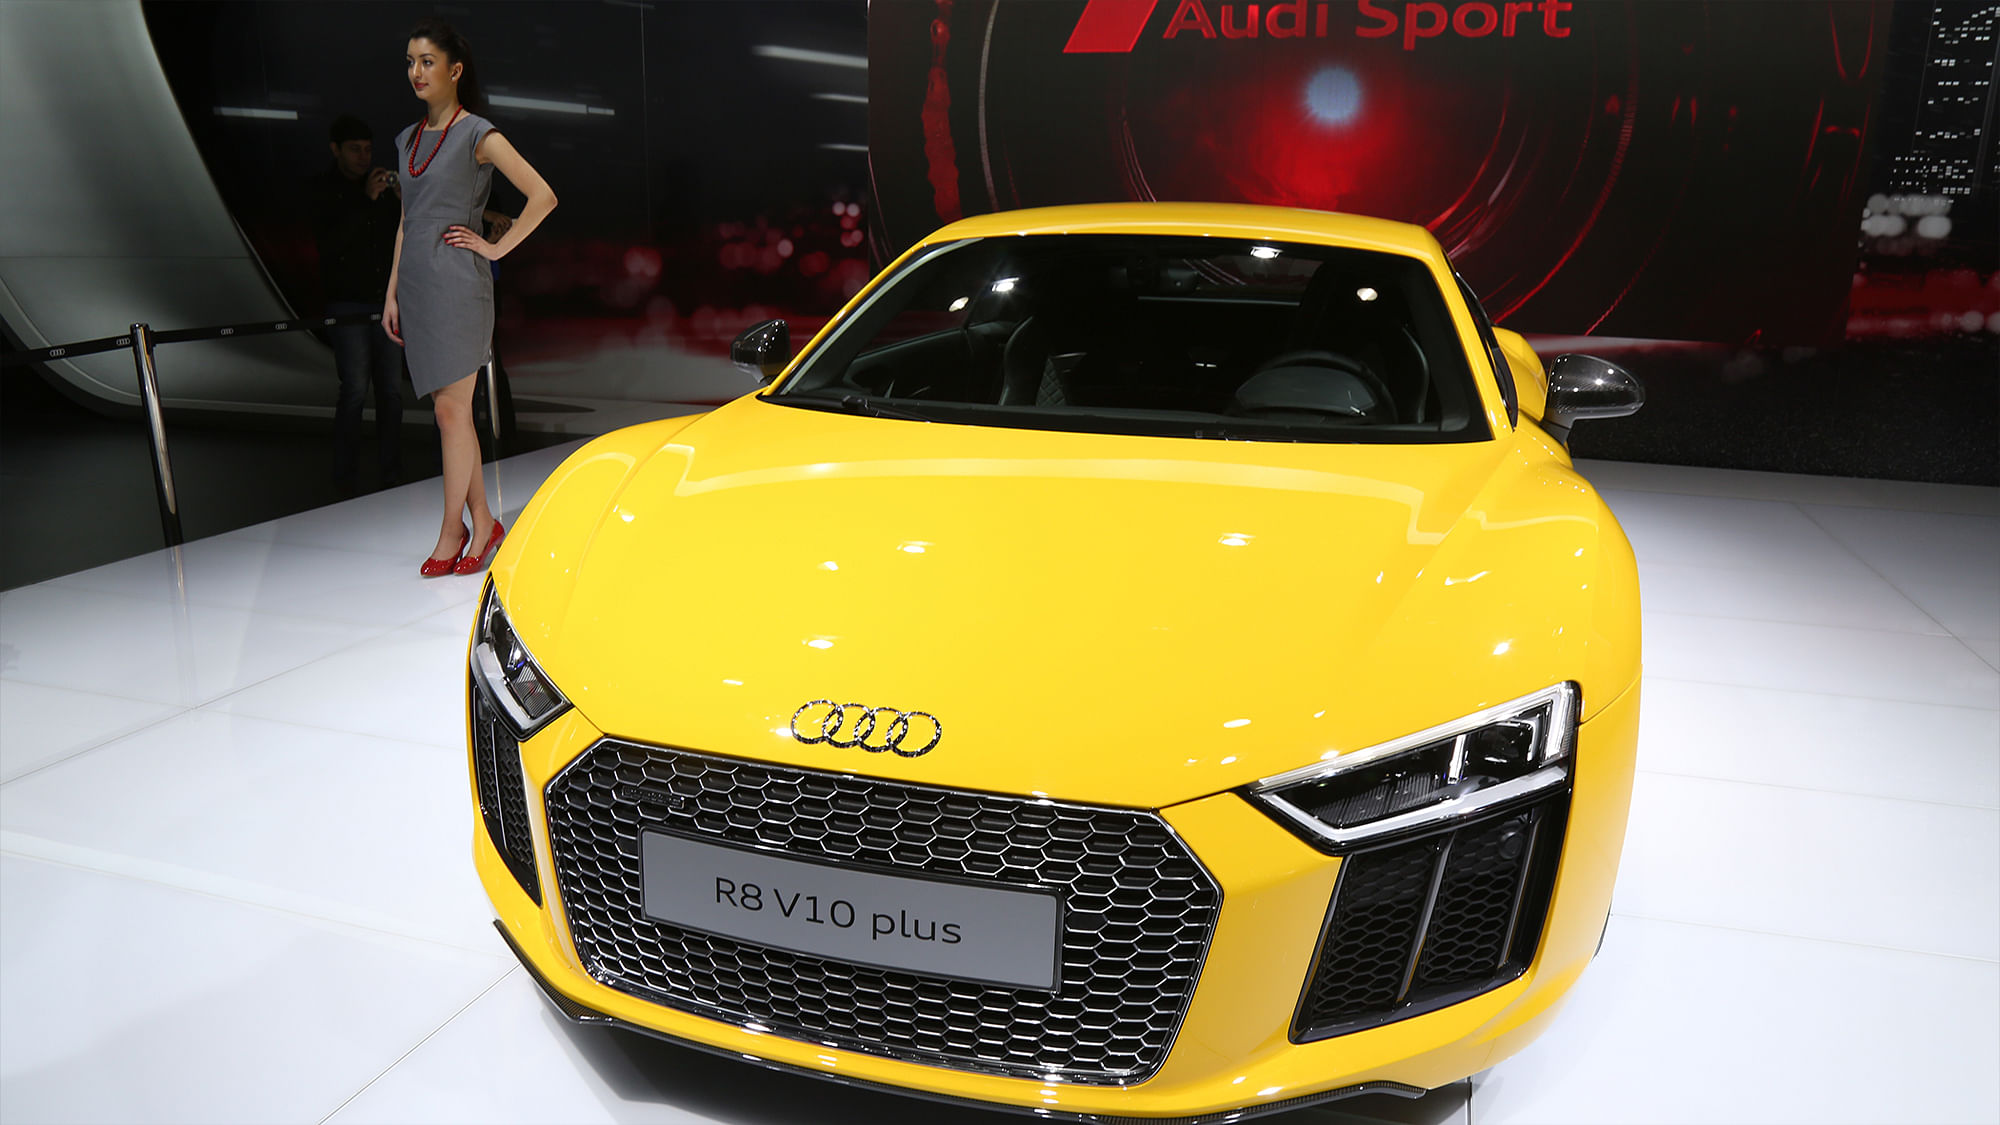 The Audi R8 V10 Plus on display at the Delhi Auto Expo 2016. (Photo: <b>The Quint</b>)